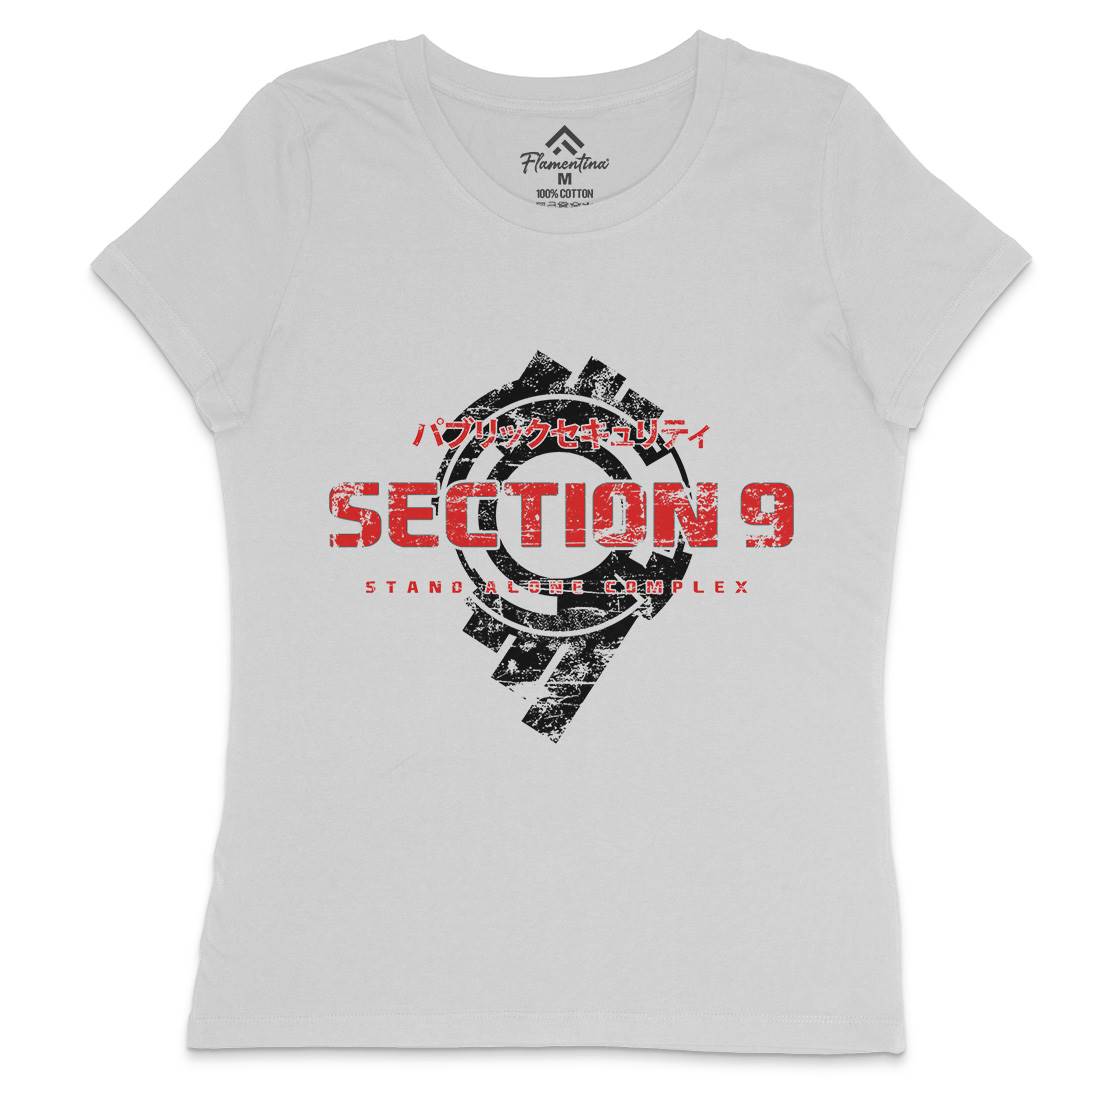 Section 9 Womens Crew Neck T-Shirt Space D193